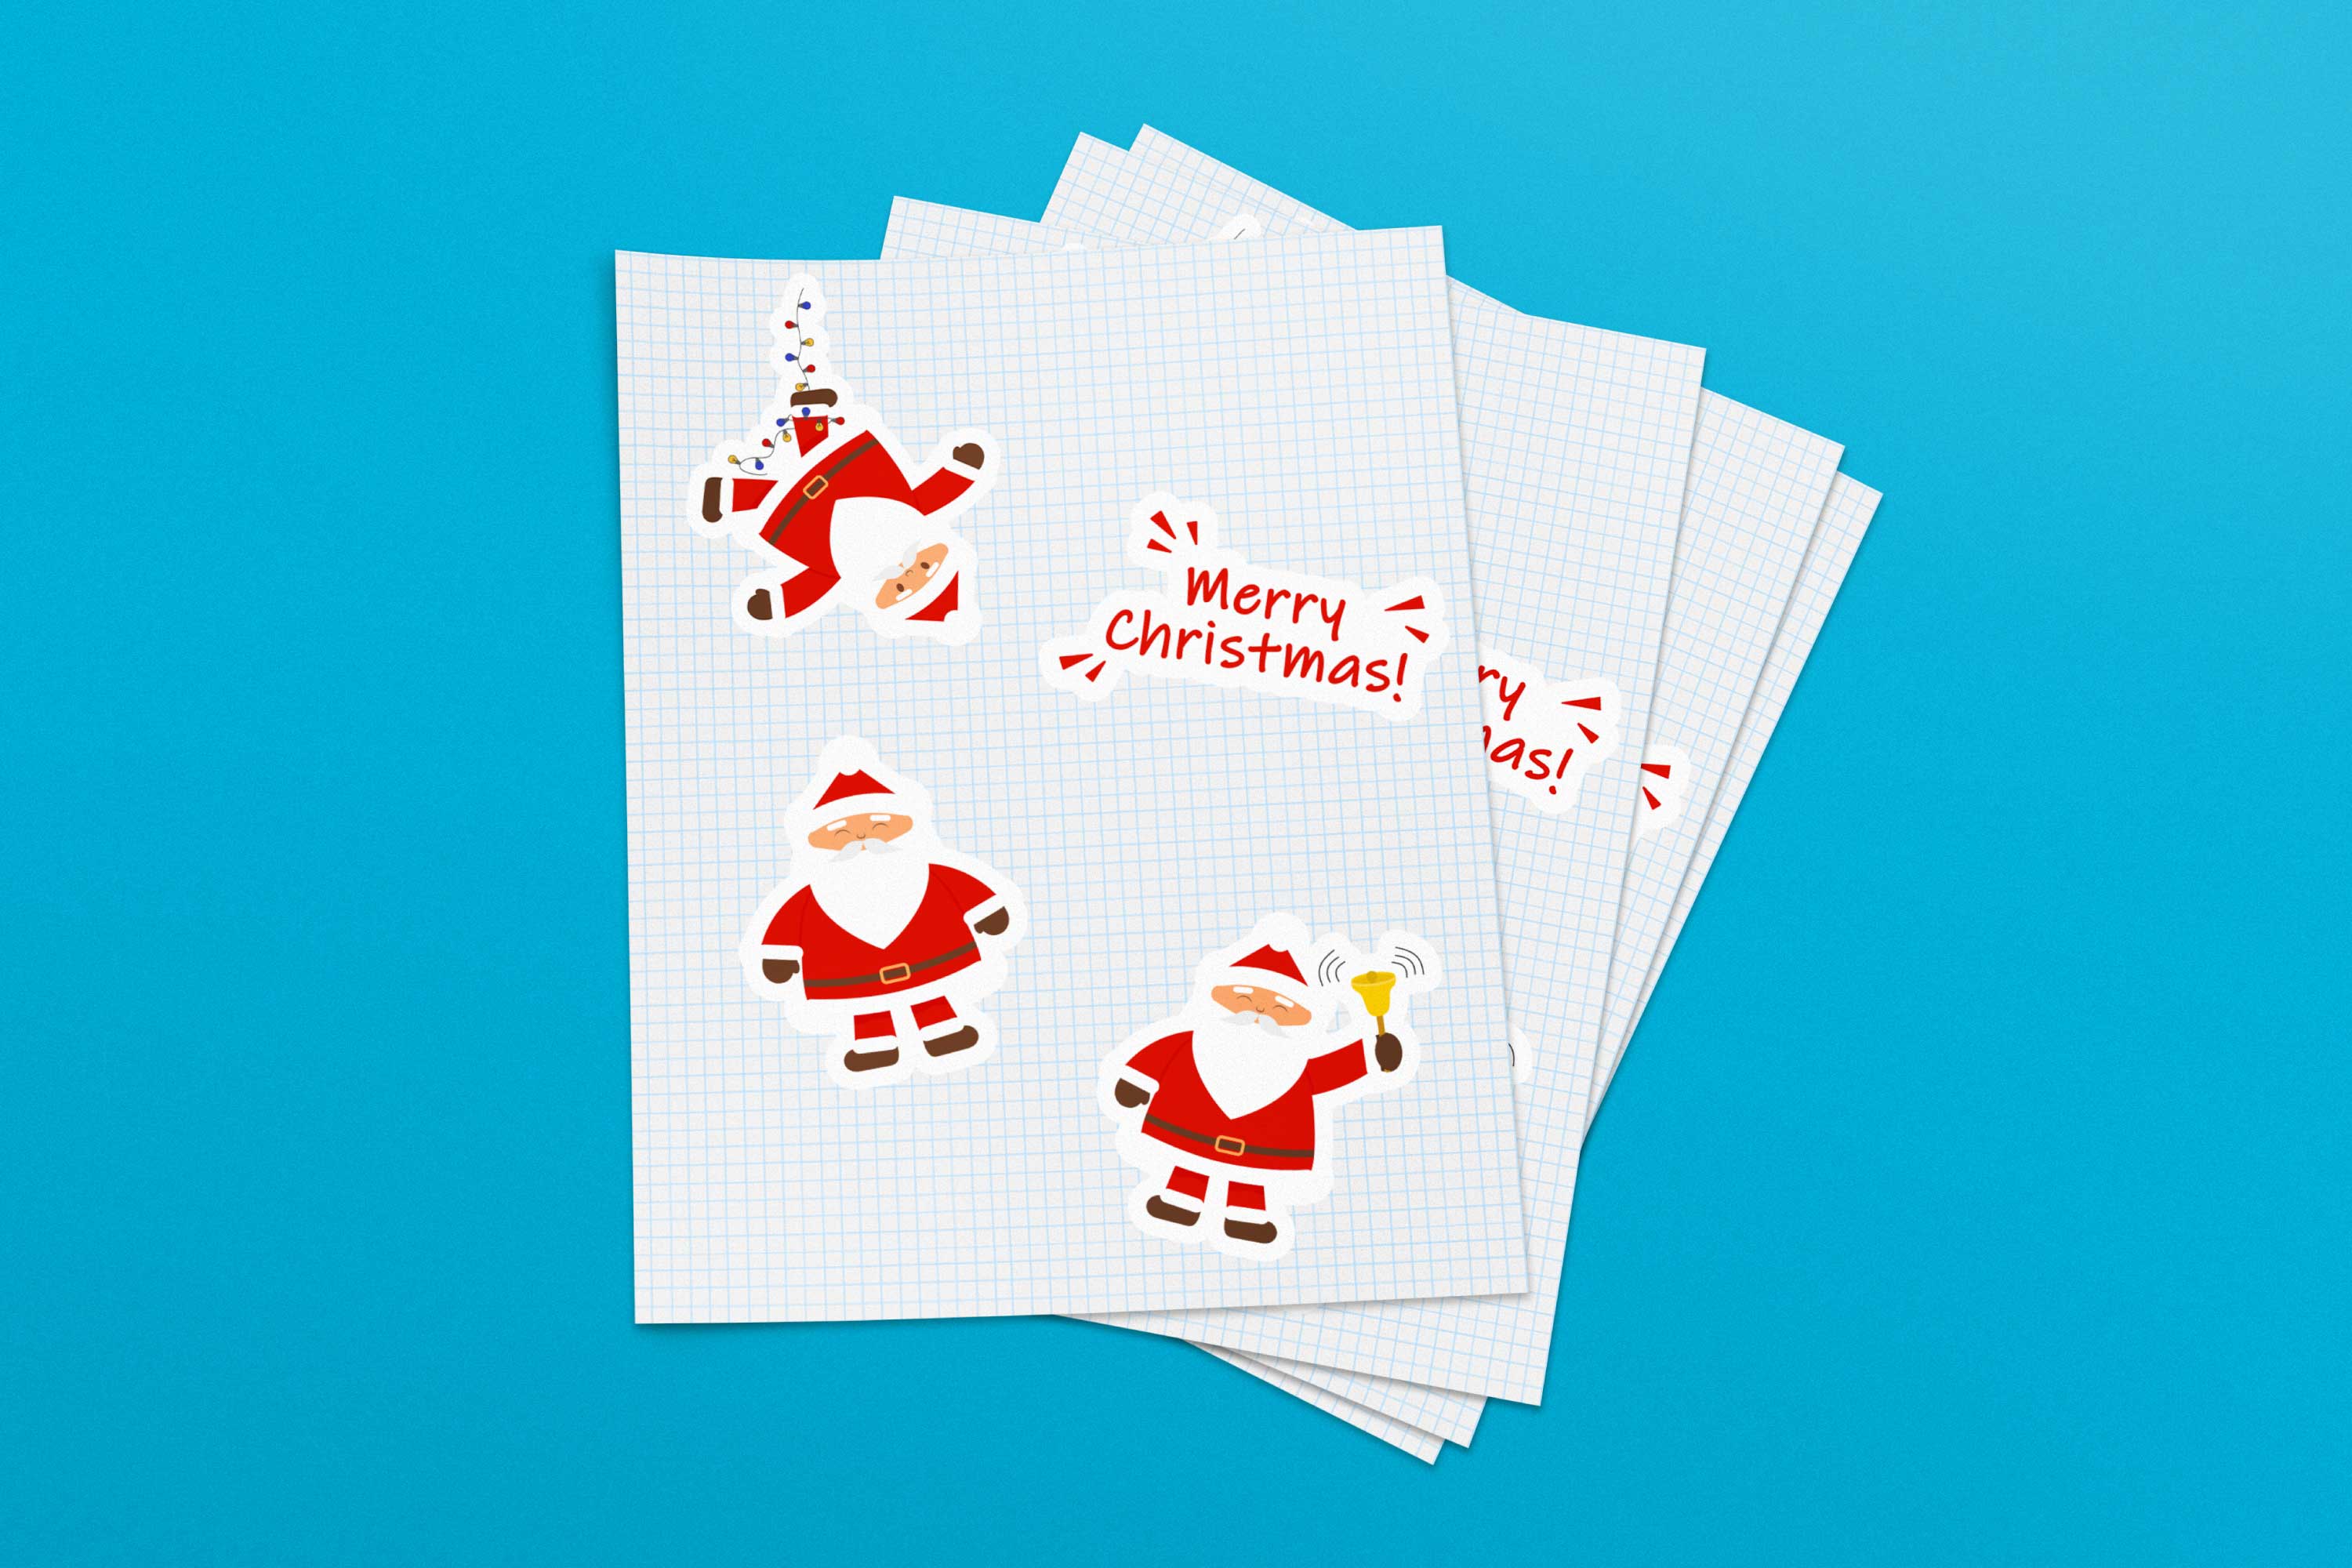 Collection of enchanting images of cute Santa stickers